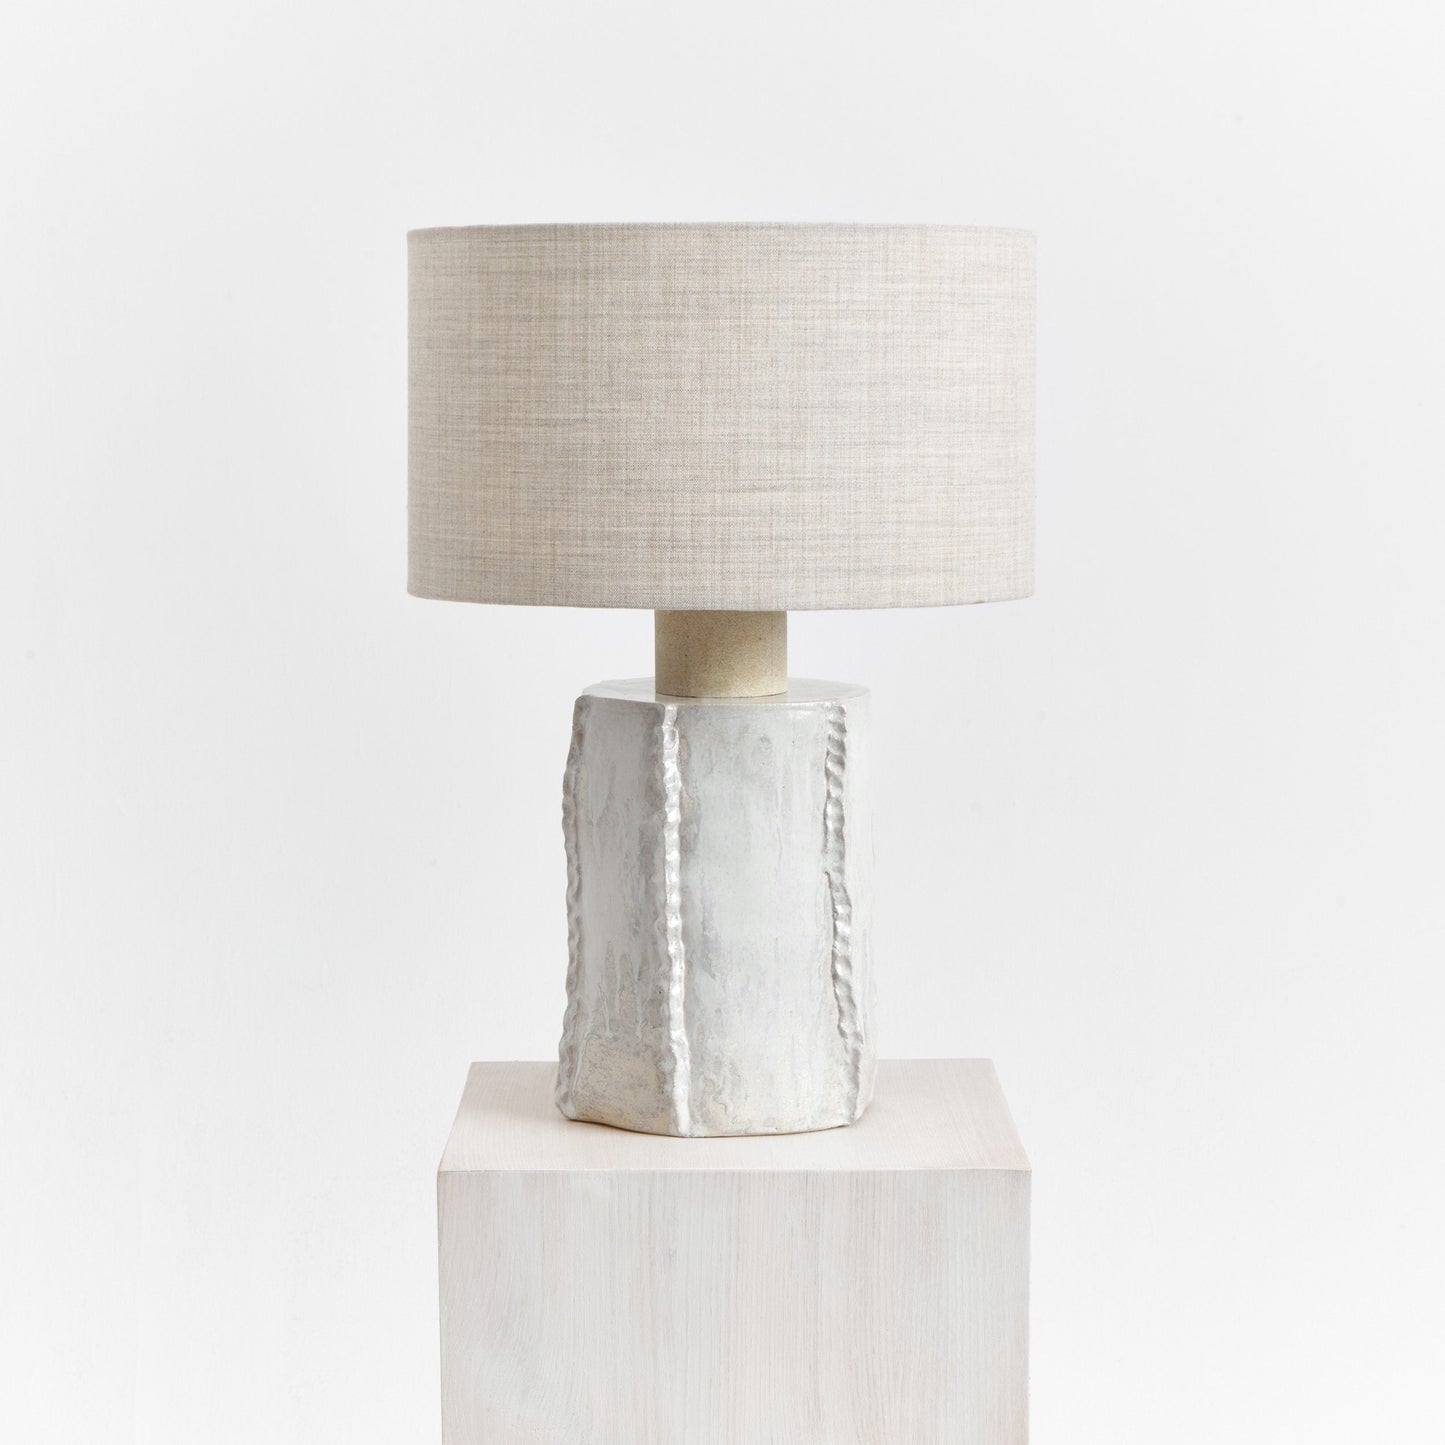 Totem Table Light in Roquefort Table & Task Lamps